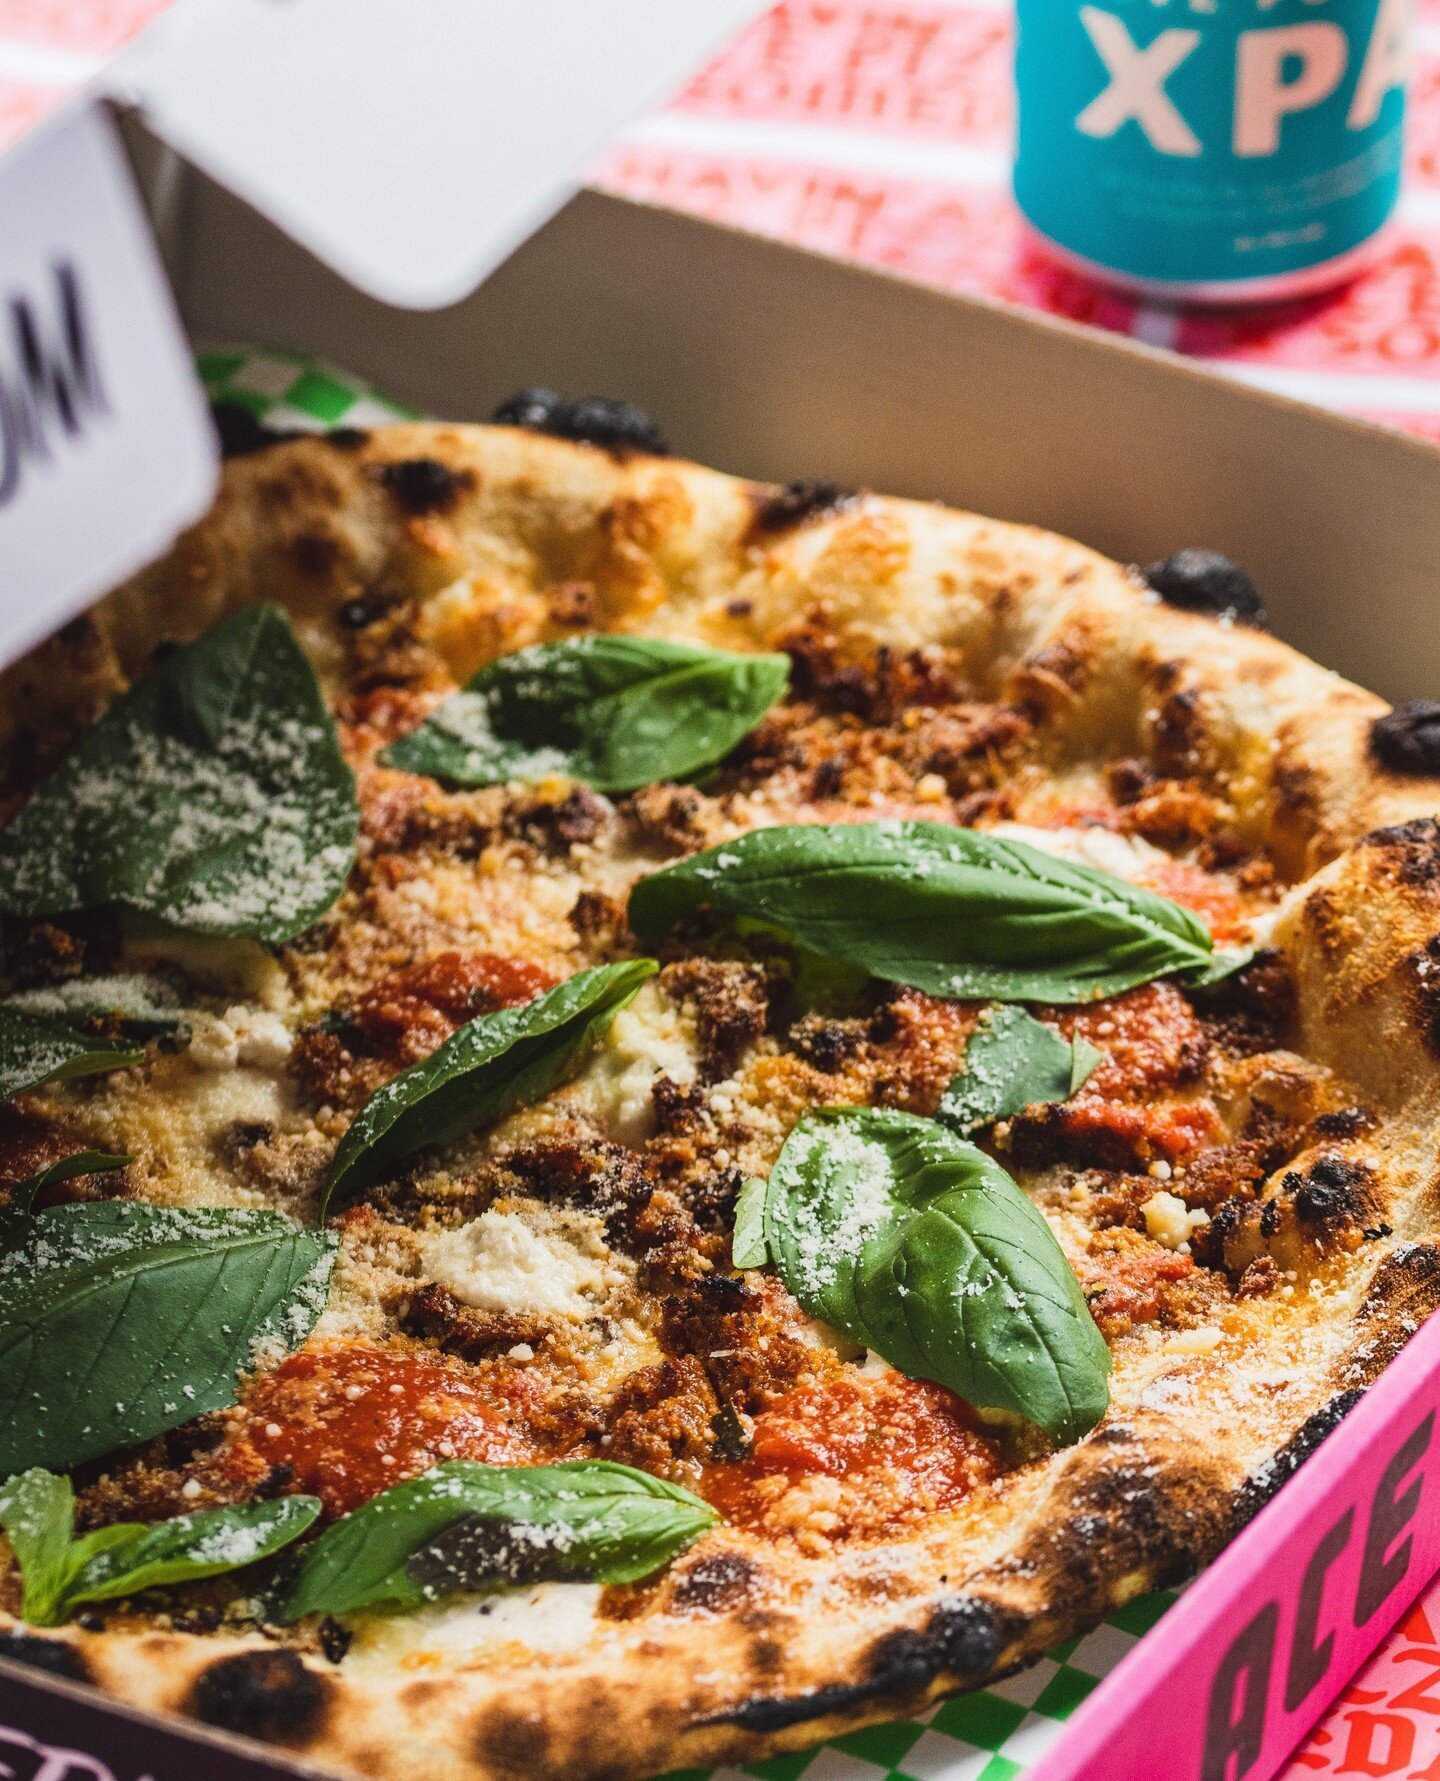 Don't waste your weekend with subpar pizza.  Swing by @somedayfinsbury and grab yourself a New Yorker, topped with fennel sausage, ricotta, marinara sauce, fresh basil, and pecorino Romano. Trust me, you will not regret it.⁠
⁠
The pizza counter is op